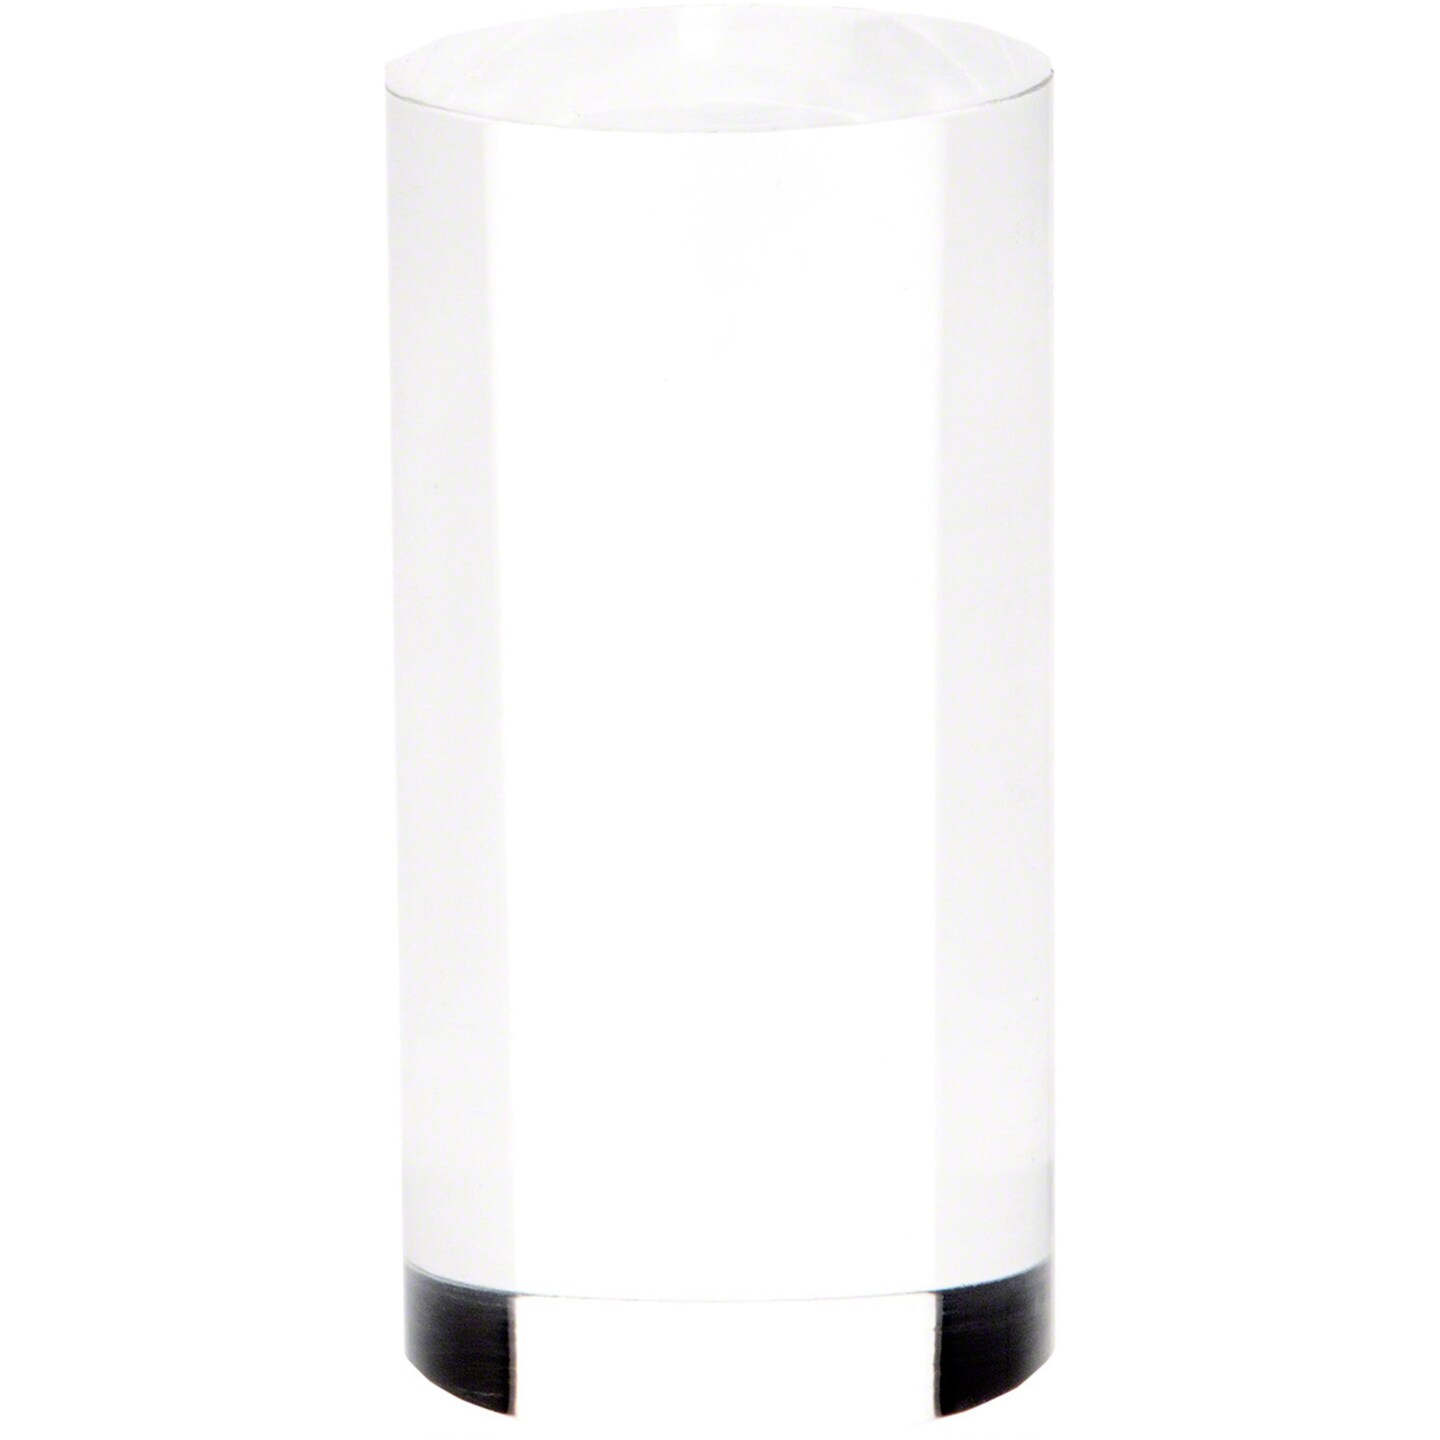 Plymor Frosted Acrylic Solid Cylinder Round Display Riser, 1.5